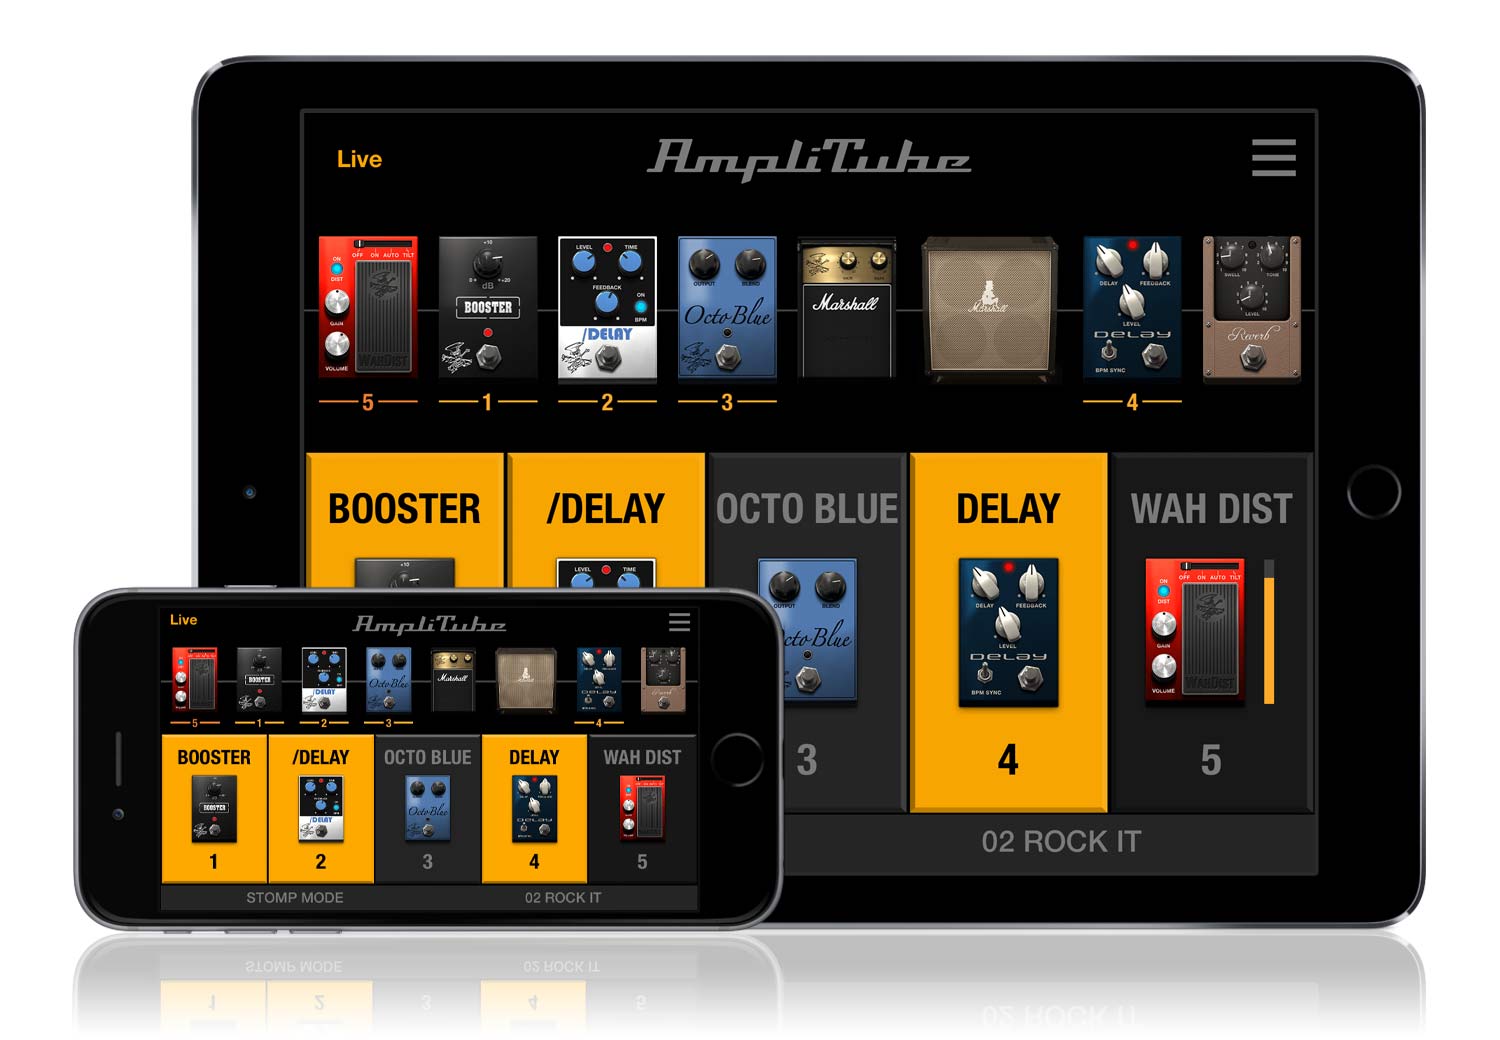 download the last version for ios AmpliTube 5.7.0